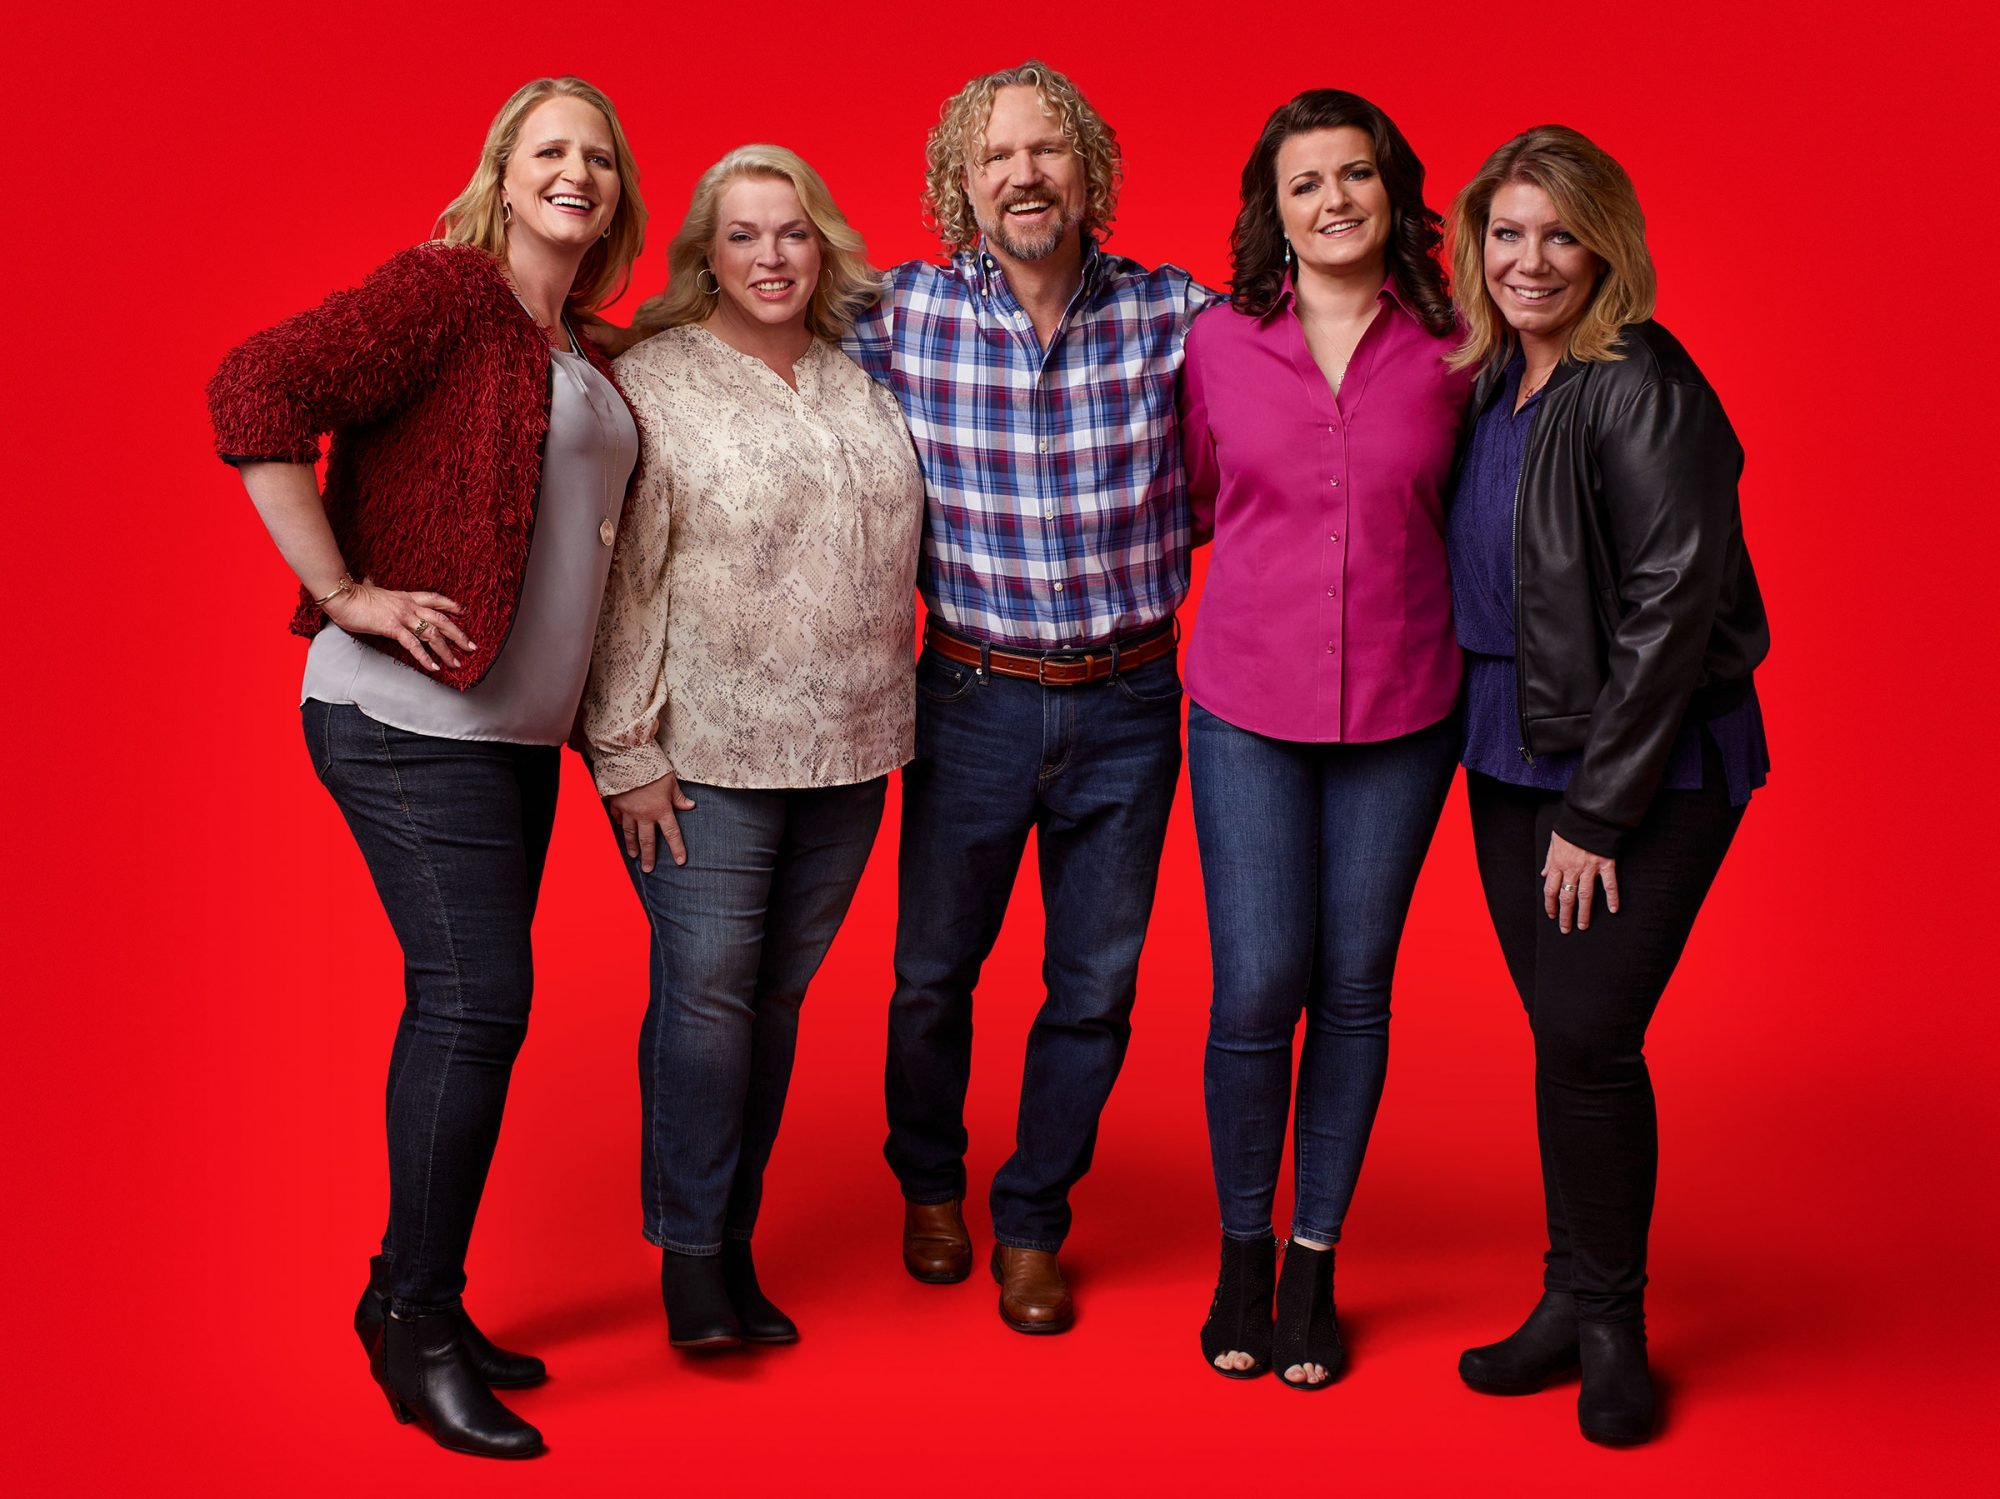 Christine Brown, Janelle Brown, Kody Brown, Robyn Brown, and Meri Brown standing together in front of a red background on 'Sister Wives'